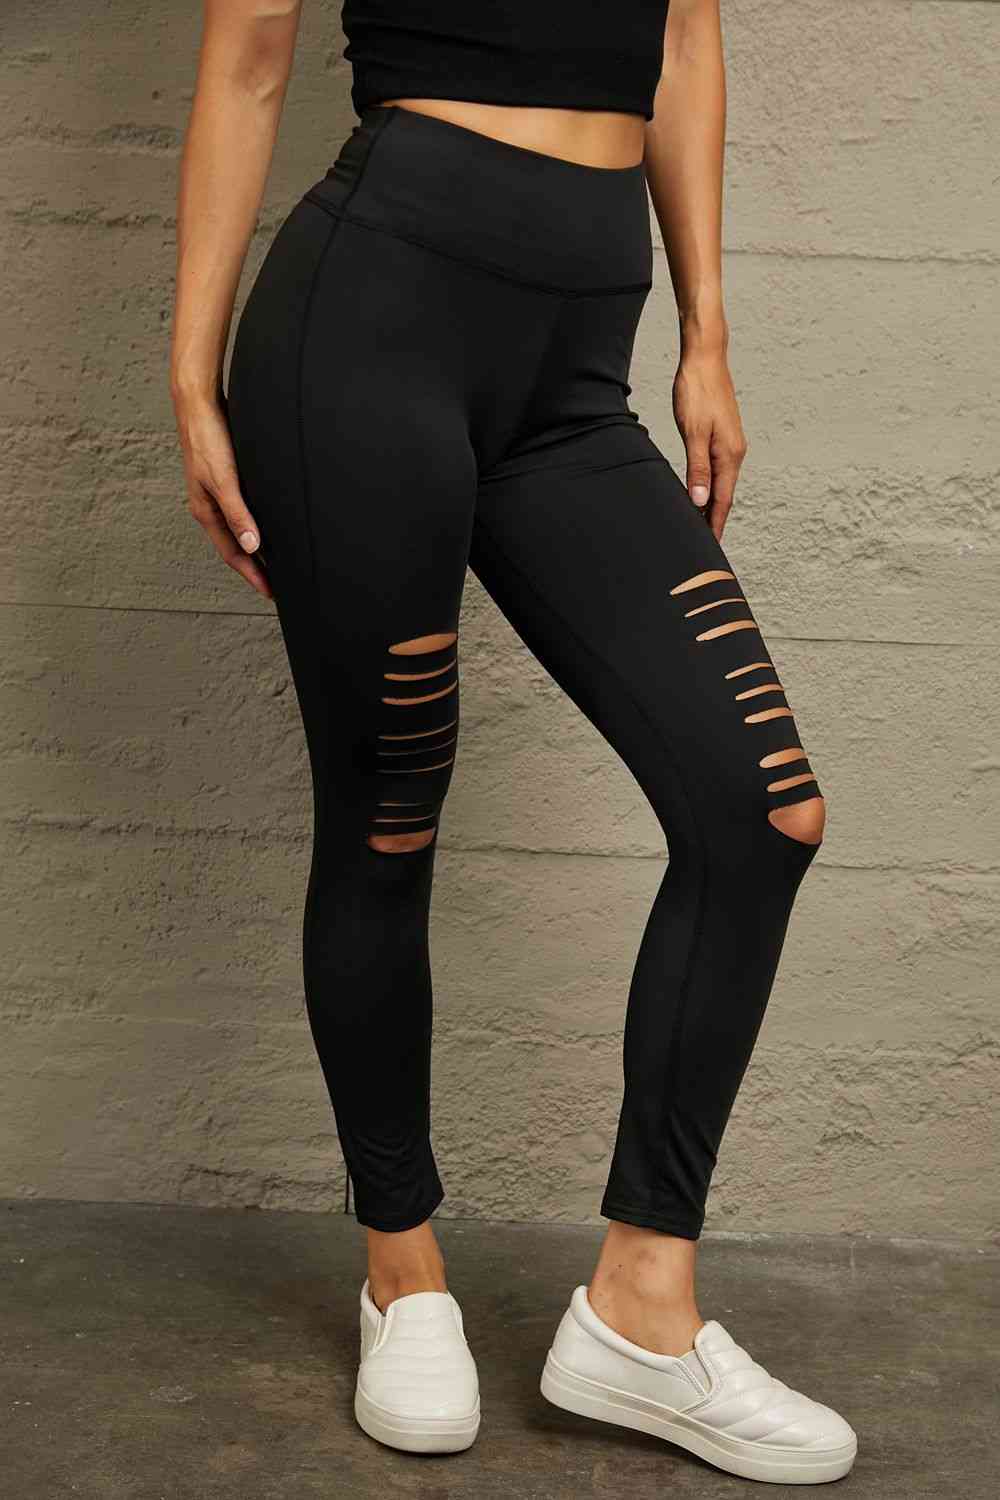 Double Take Wide Waistband Distressed Slim Fit Leggings   